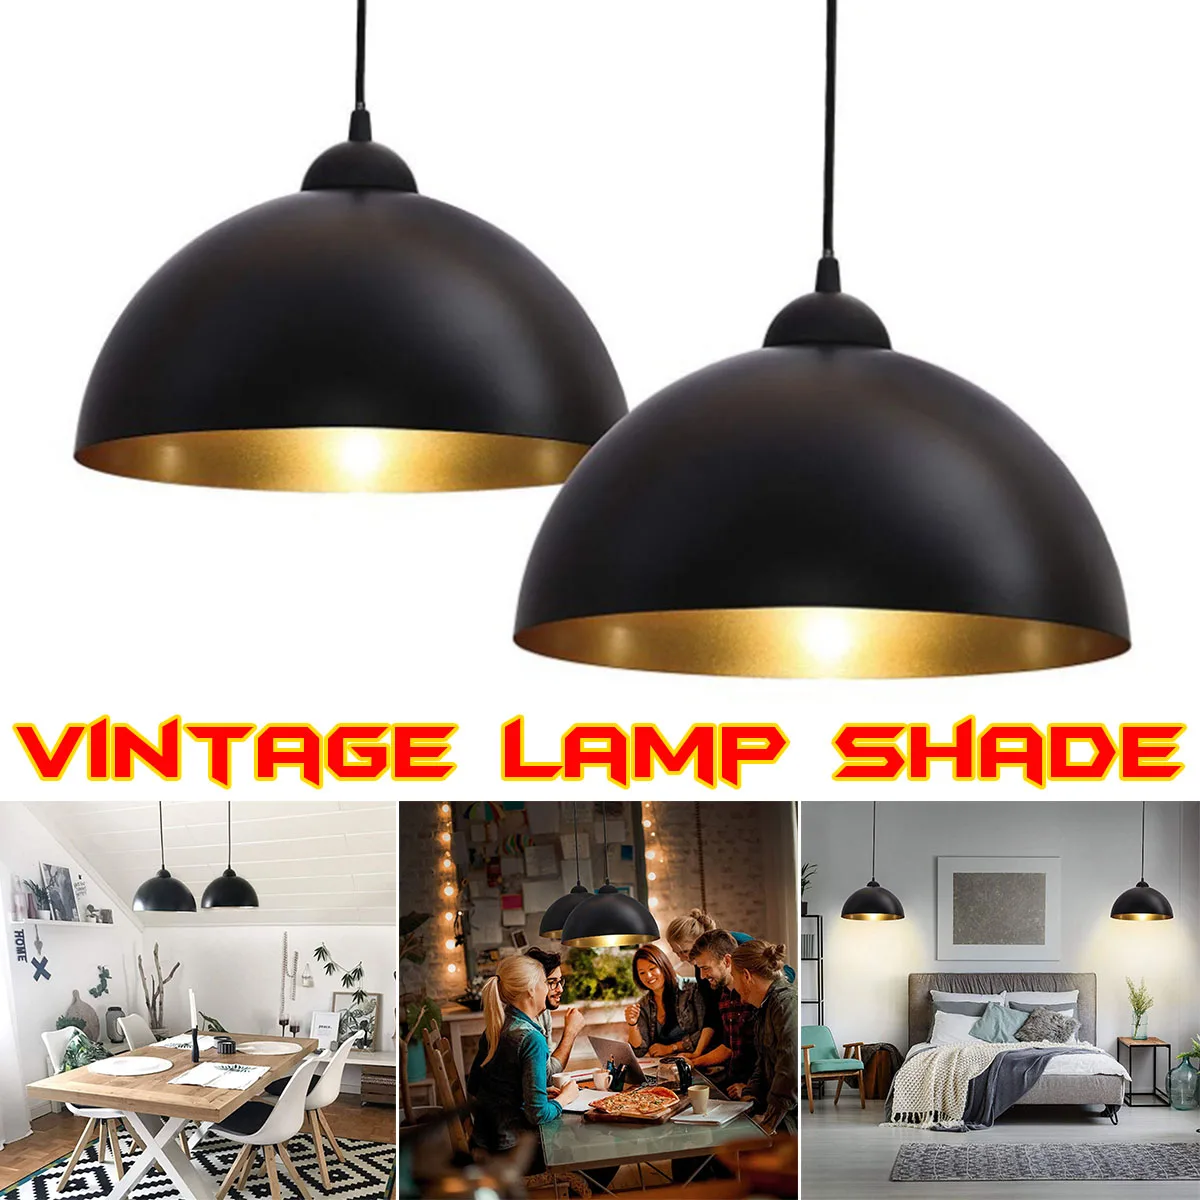 2x Retro Industrial Round Lamp Shade Cover Iron Lampshade for Corridor Cafe Bar 